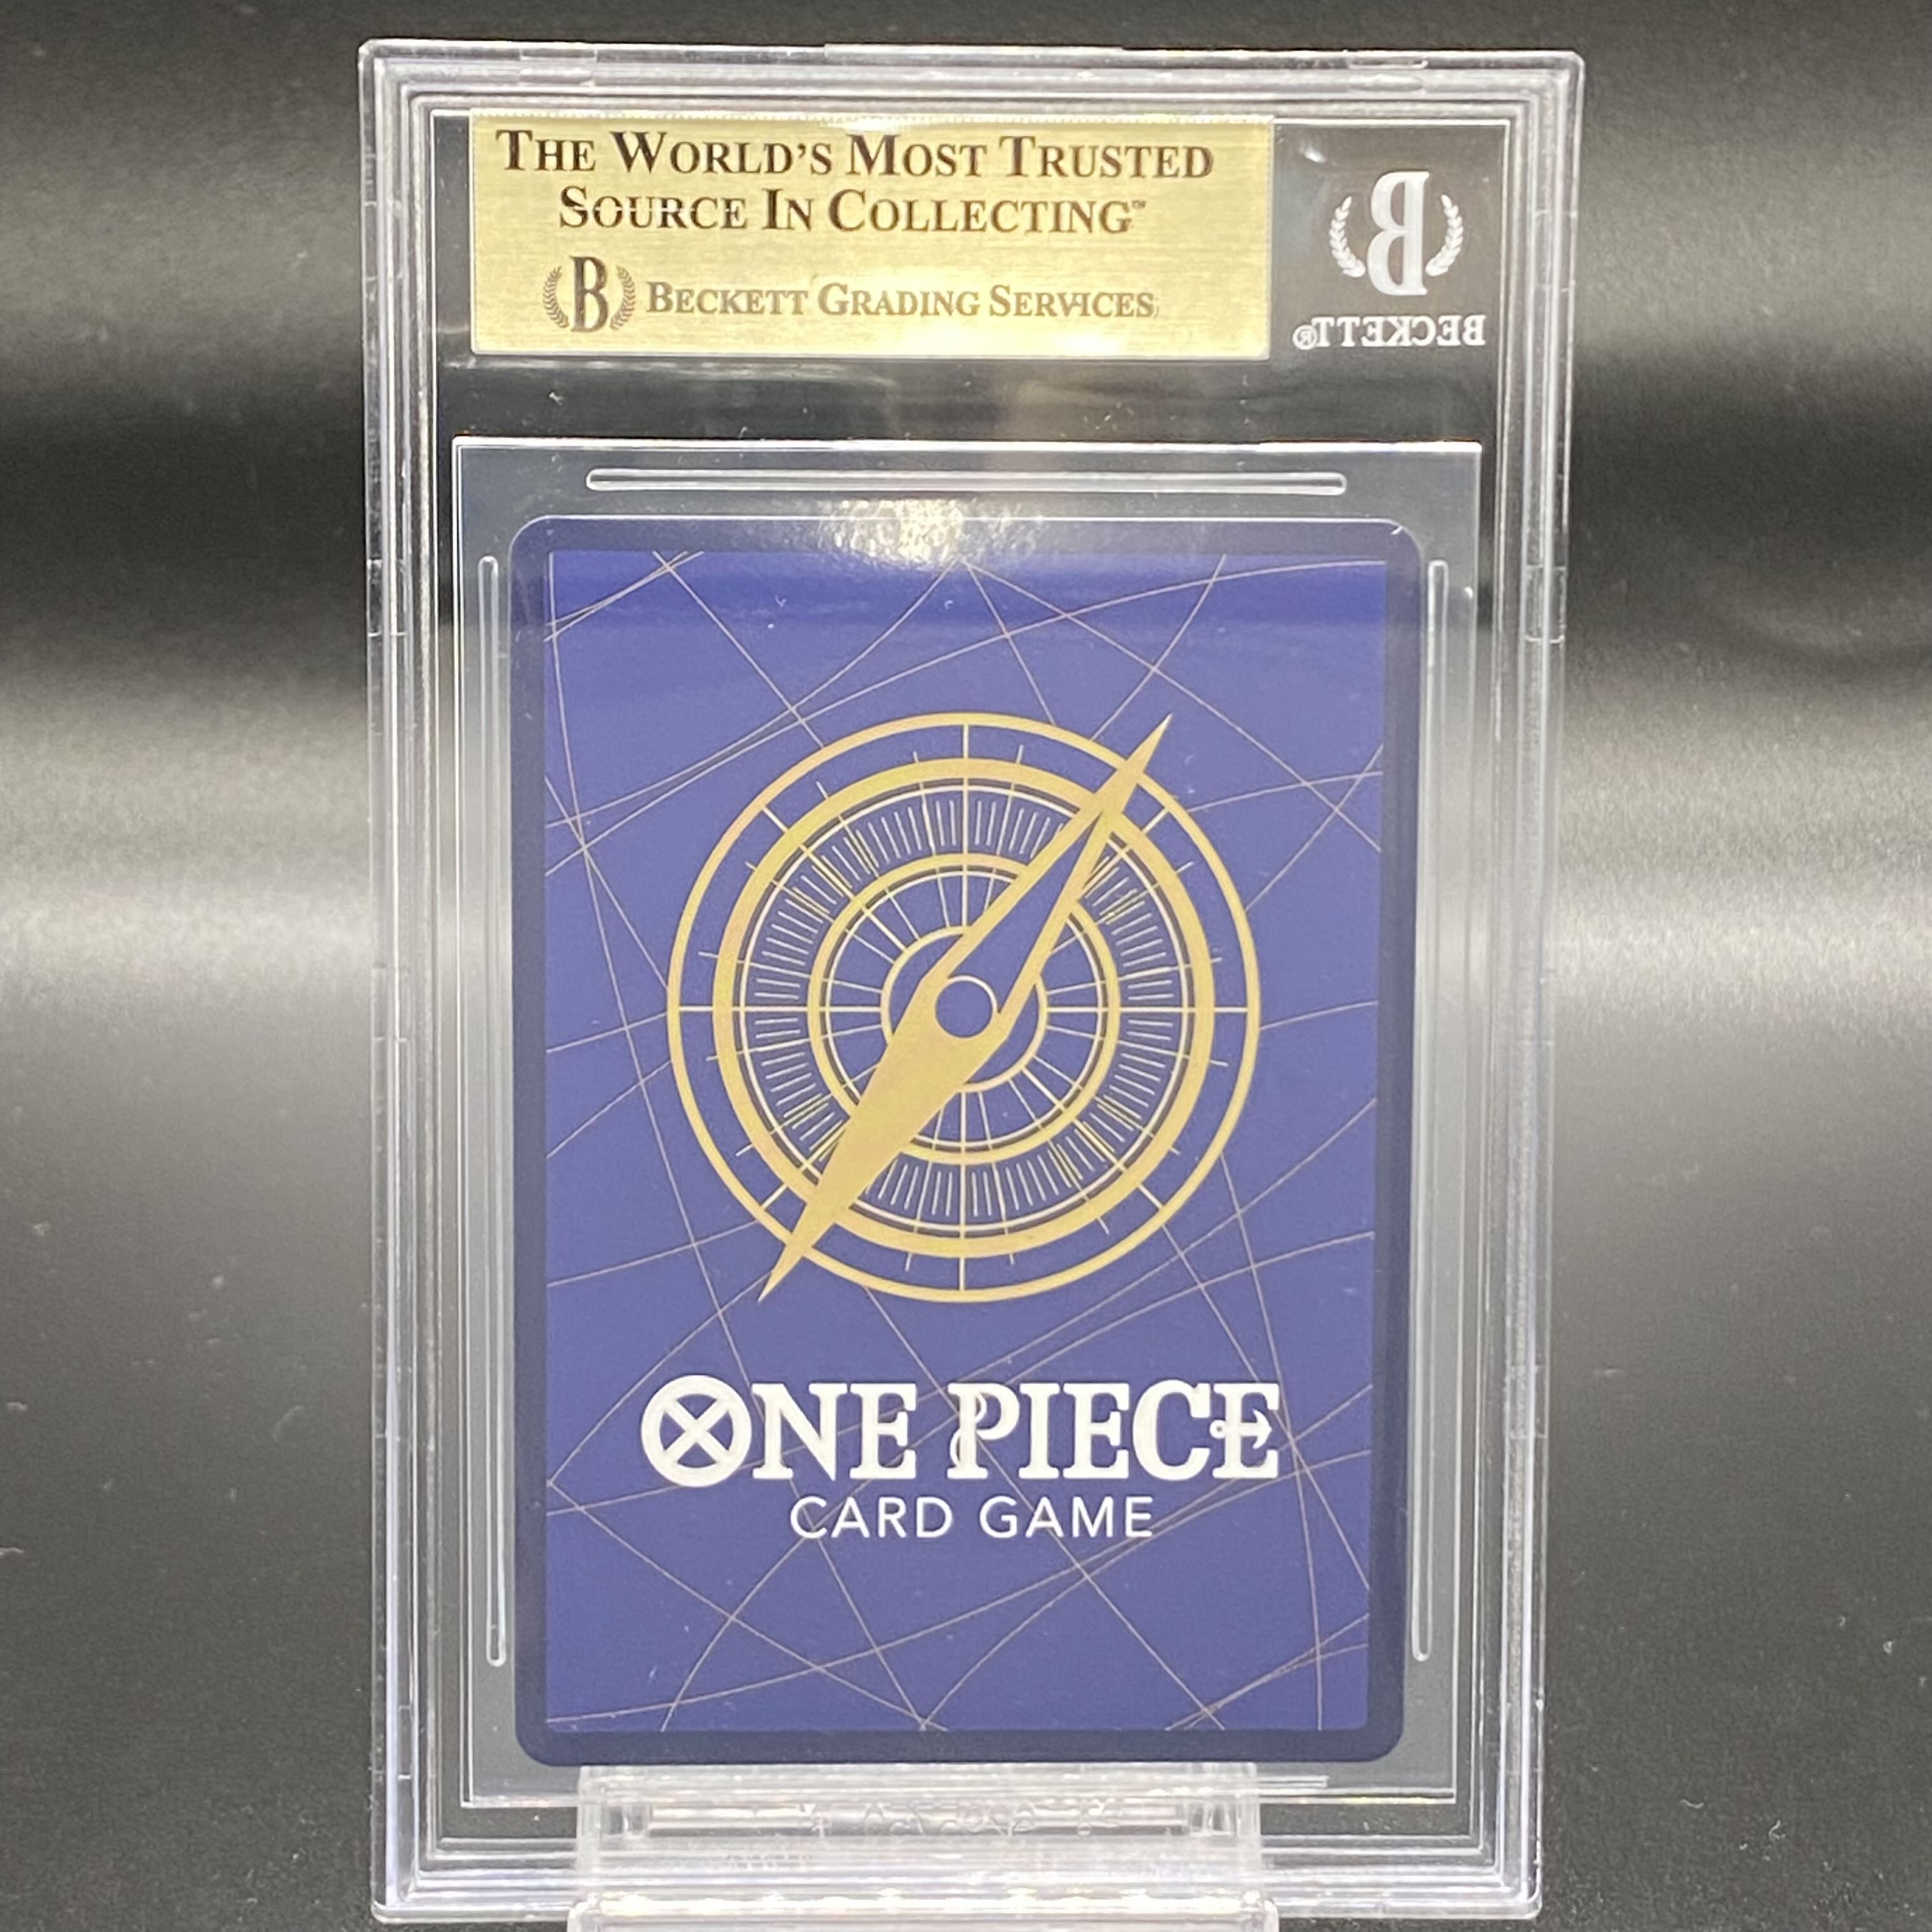 BGS10] Shanks (杰克斯) Serial Numbered Flagship Battle Promo OP01-120 Simplified Chinese